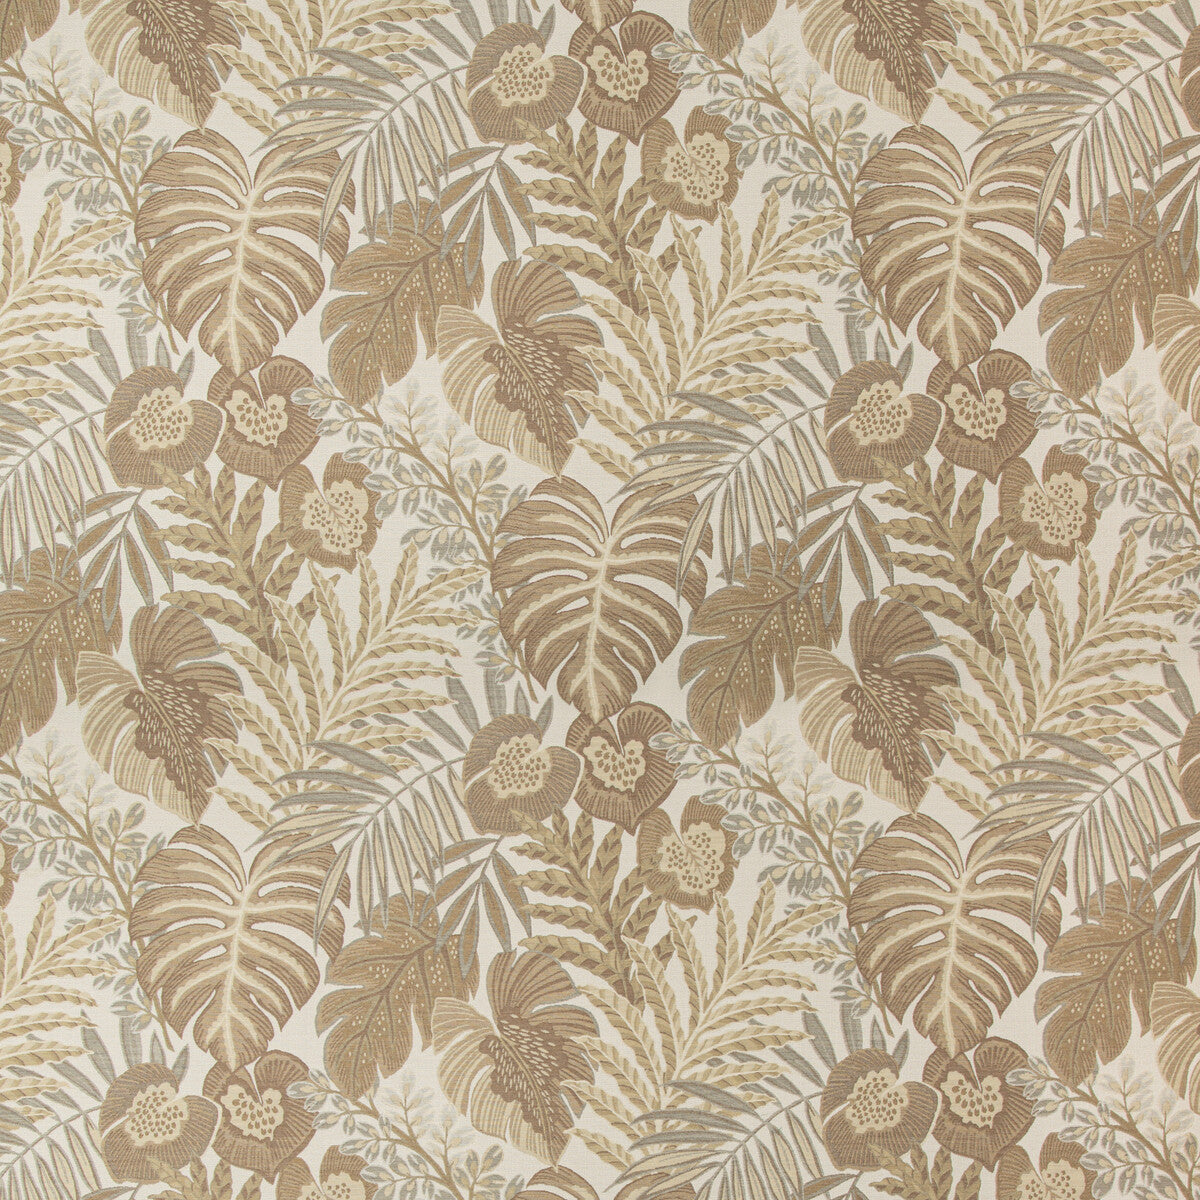 Sanur fabric in beach color - pattern 35824.16.0 - by Kravet Design in the Indoor / Outdoor collection